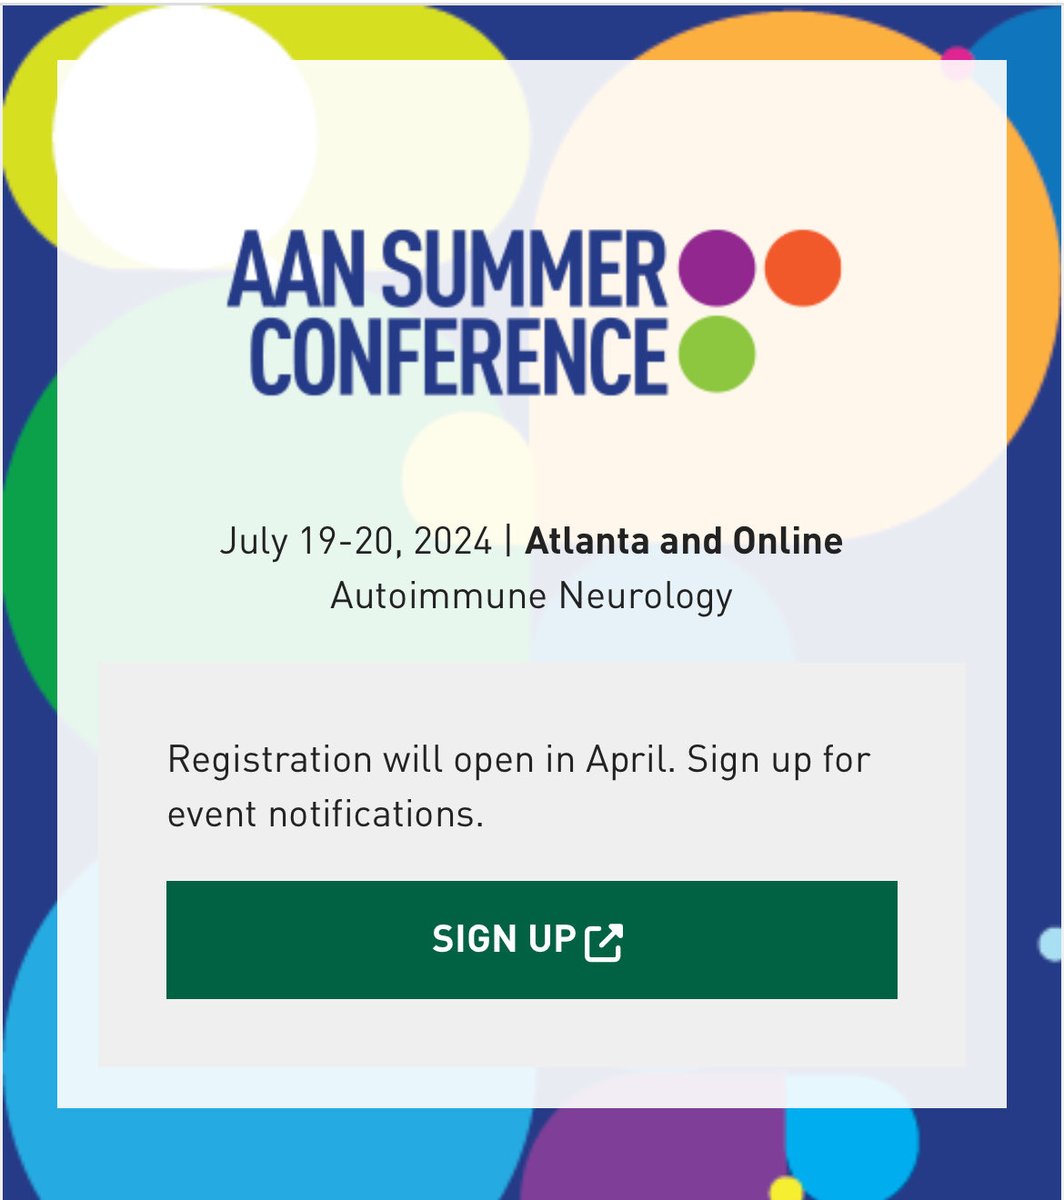 📣 AAN Summer Conference on Autoimmune Neurology July 19-20 in Atlanta ➡️ 48 hours of incredibly high yield information 🧠 Mark Your Calendar now . Details coming soon - Sign up to be the first to know: aan.com/events/summer-…